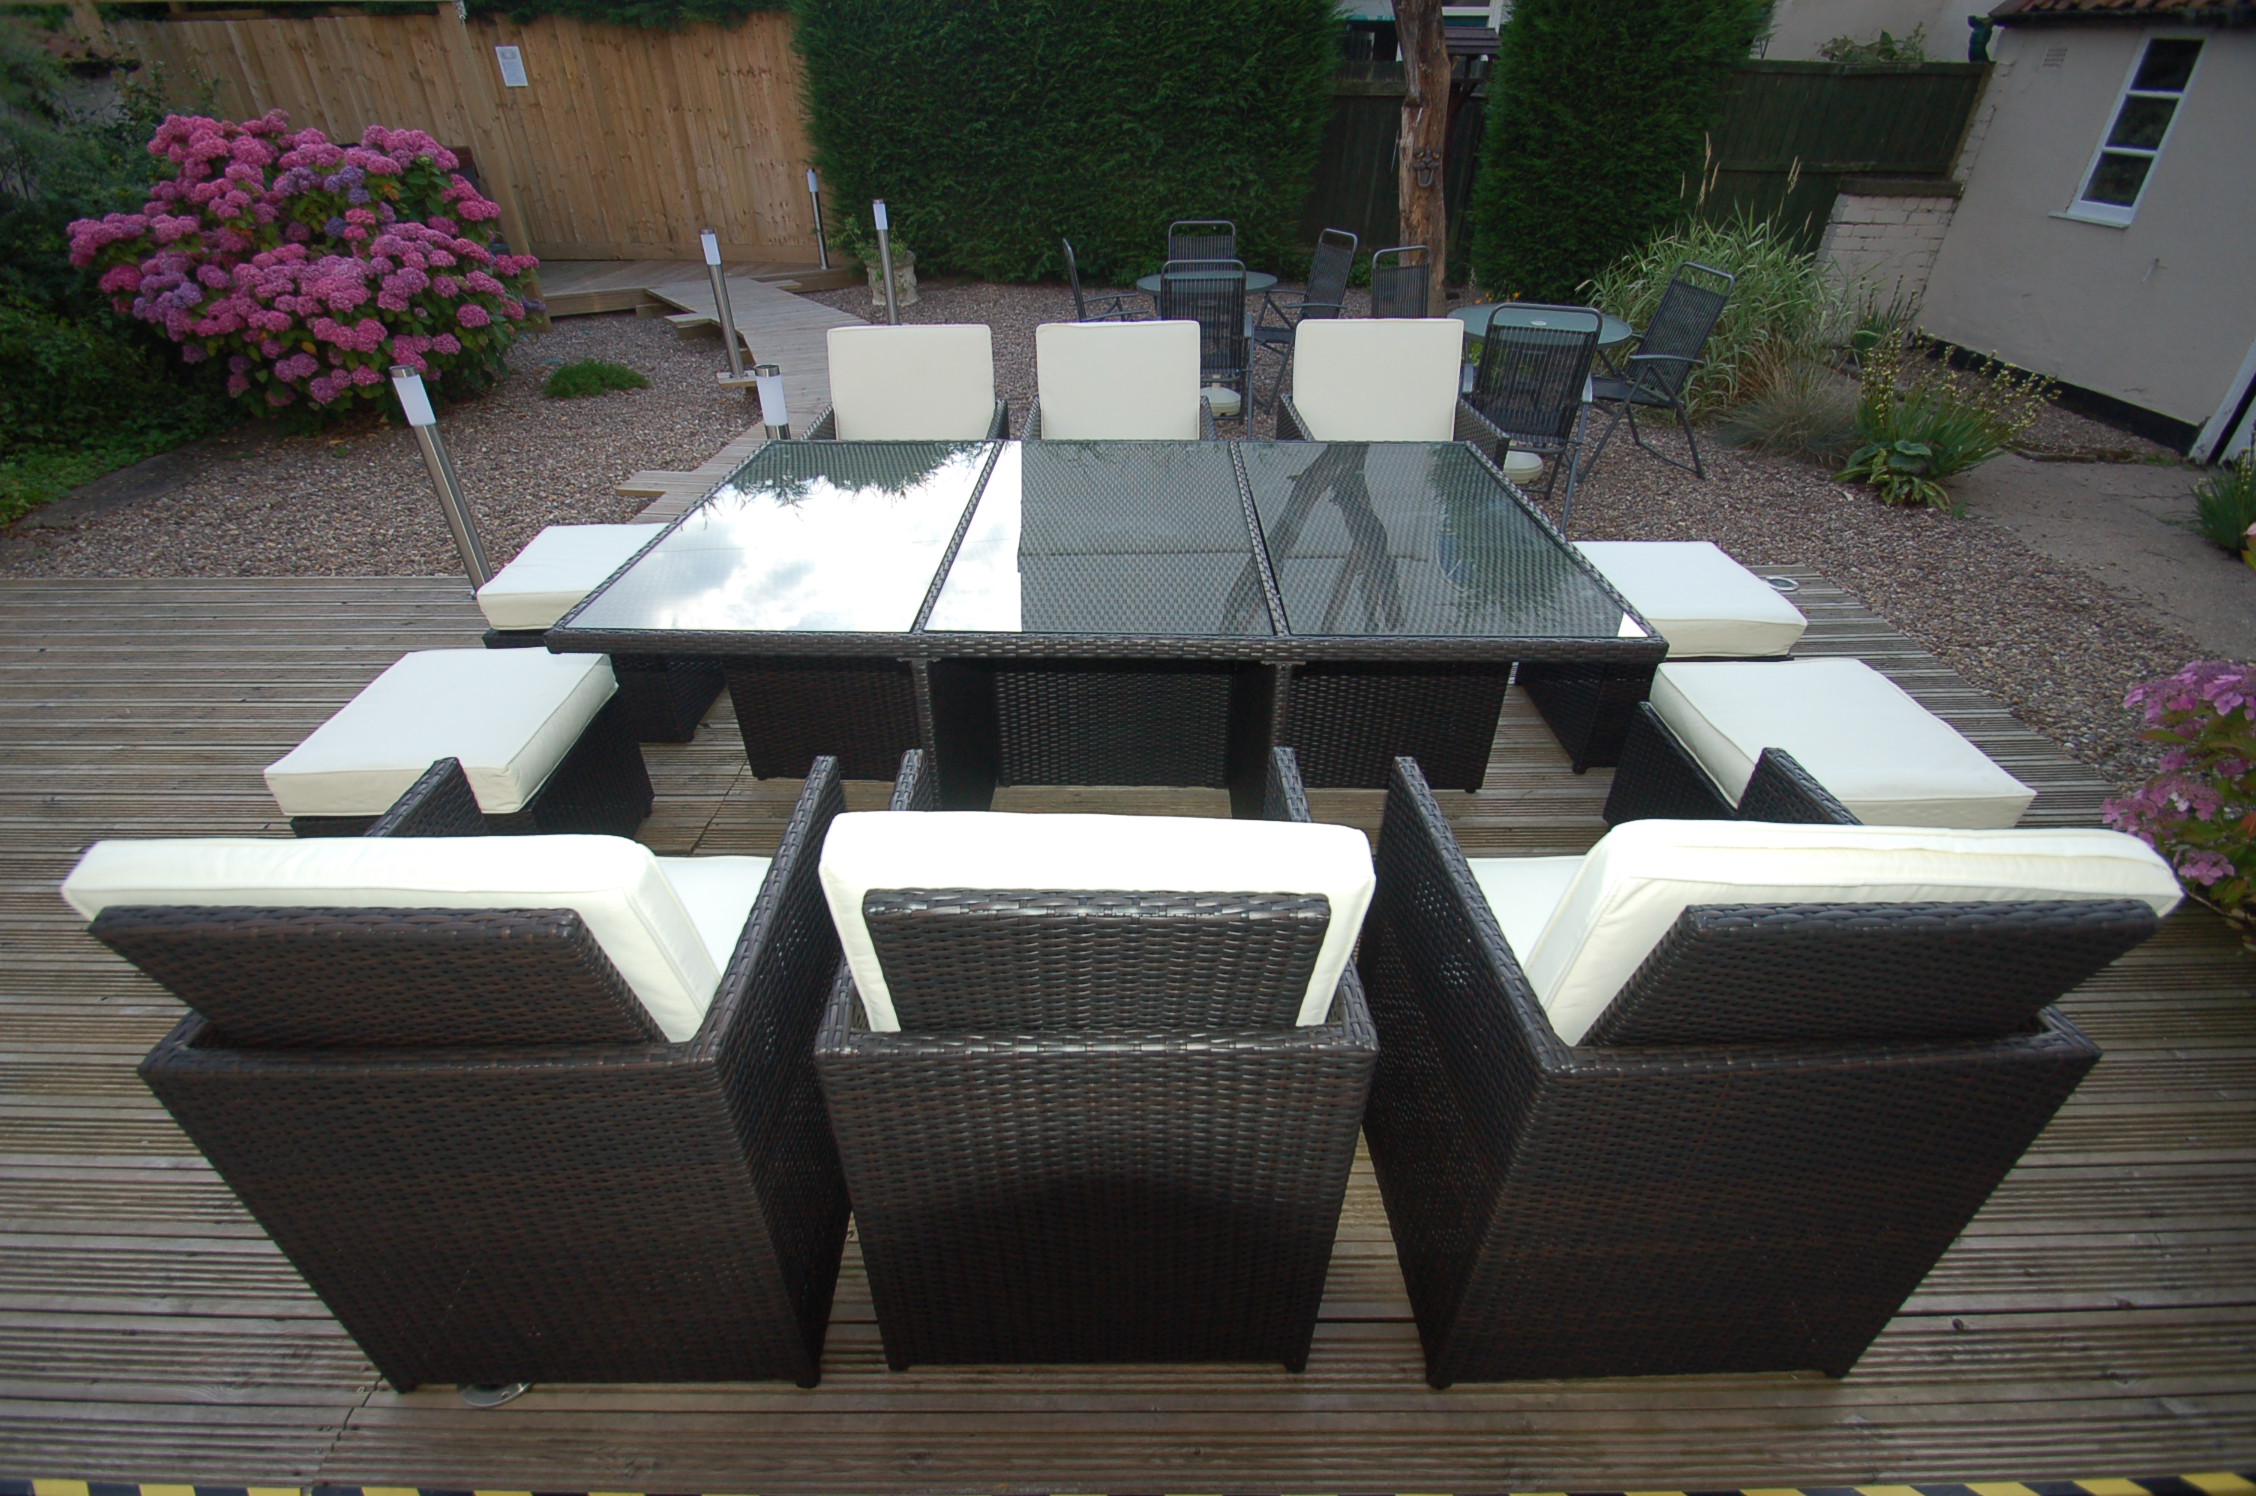 Rattan style outdoor furniture